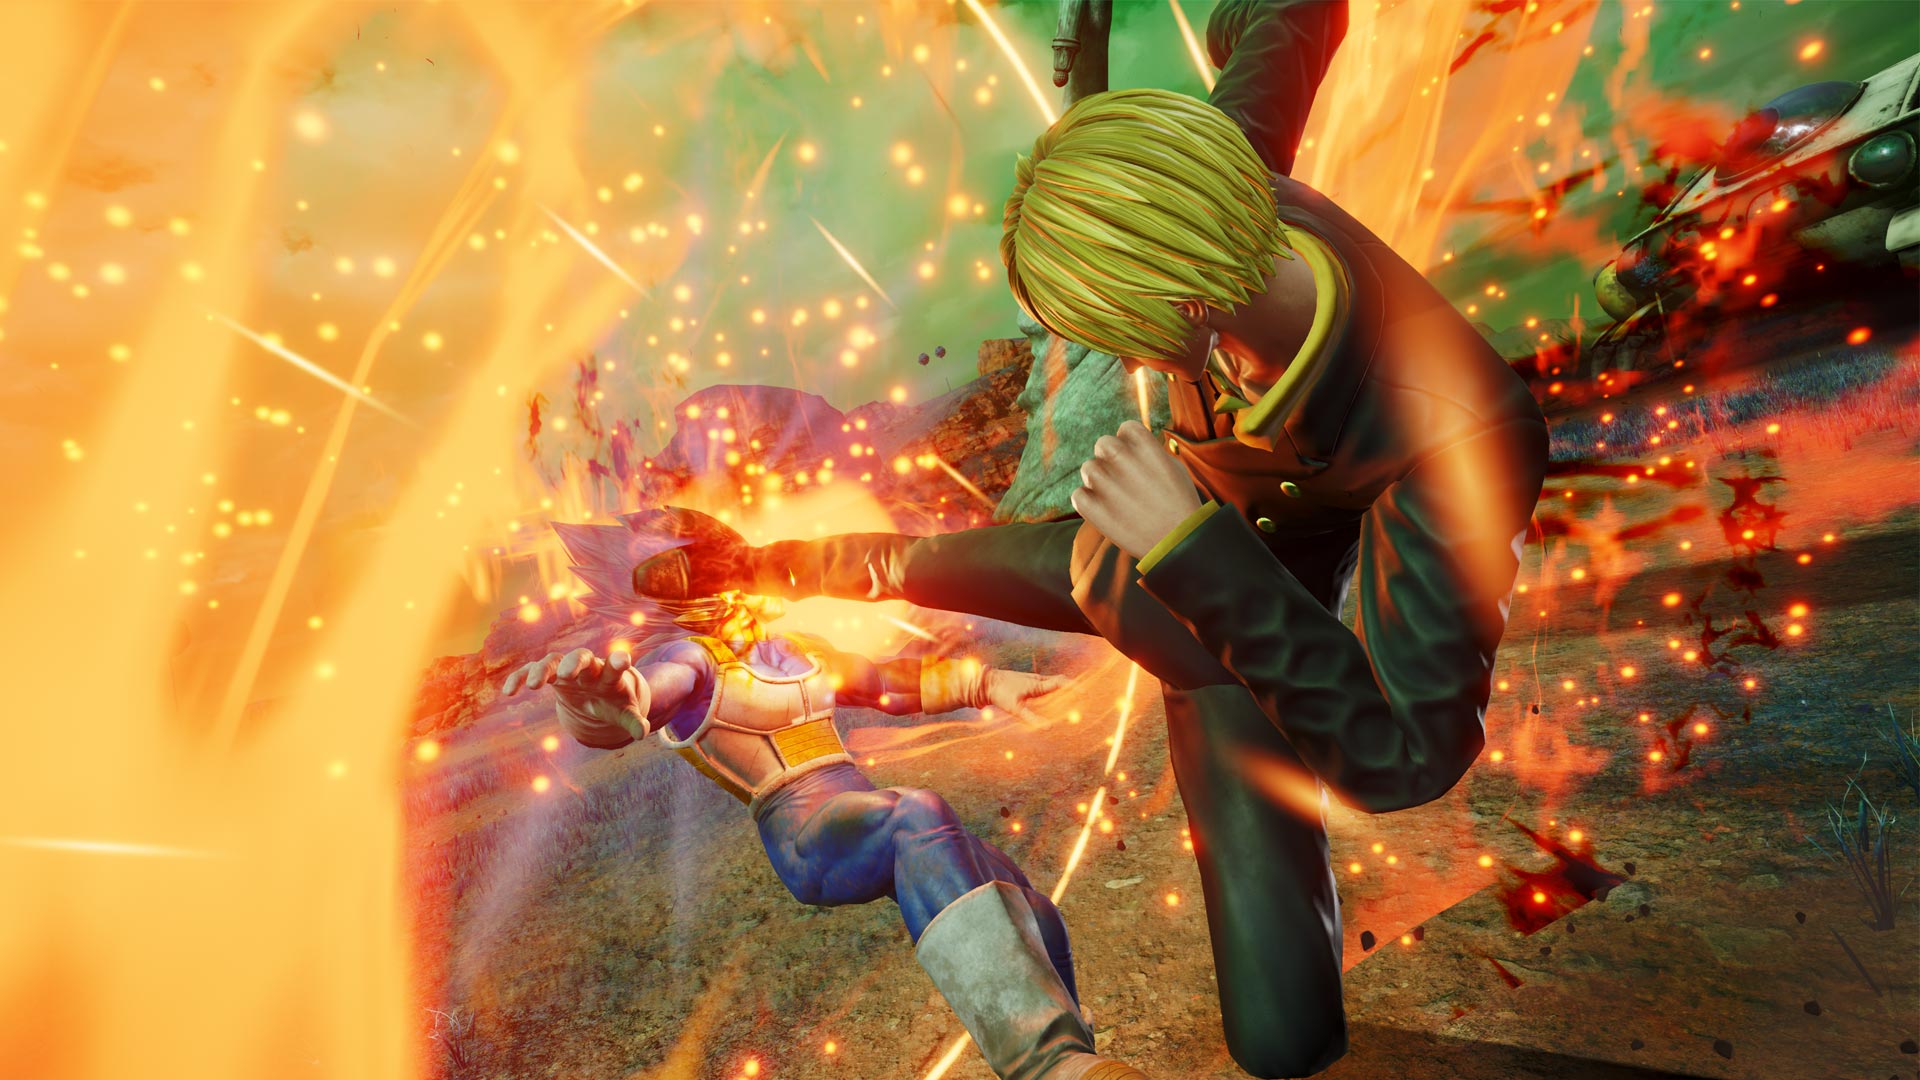 jump force ps4 best buy